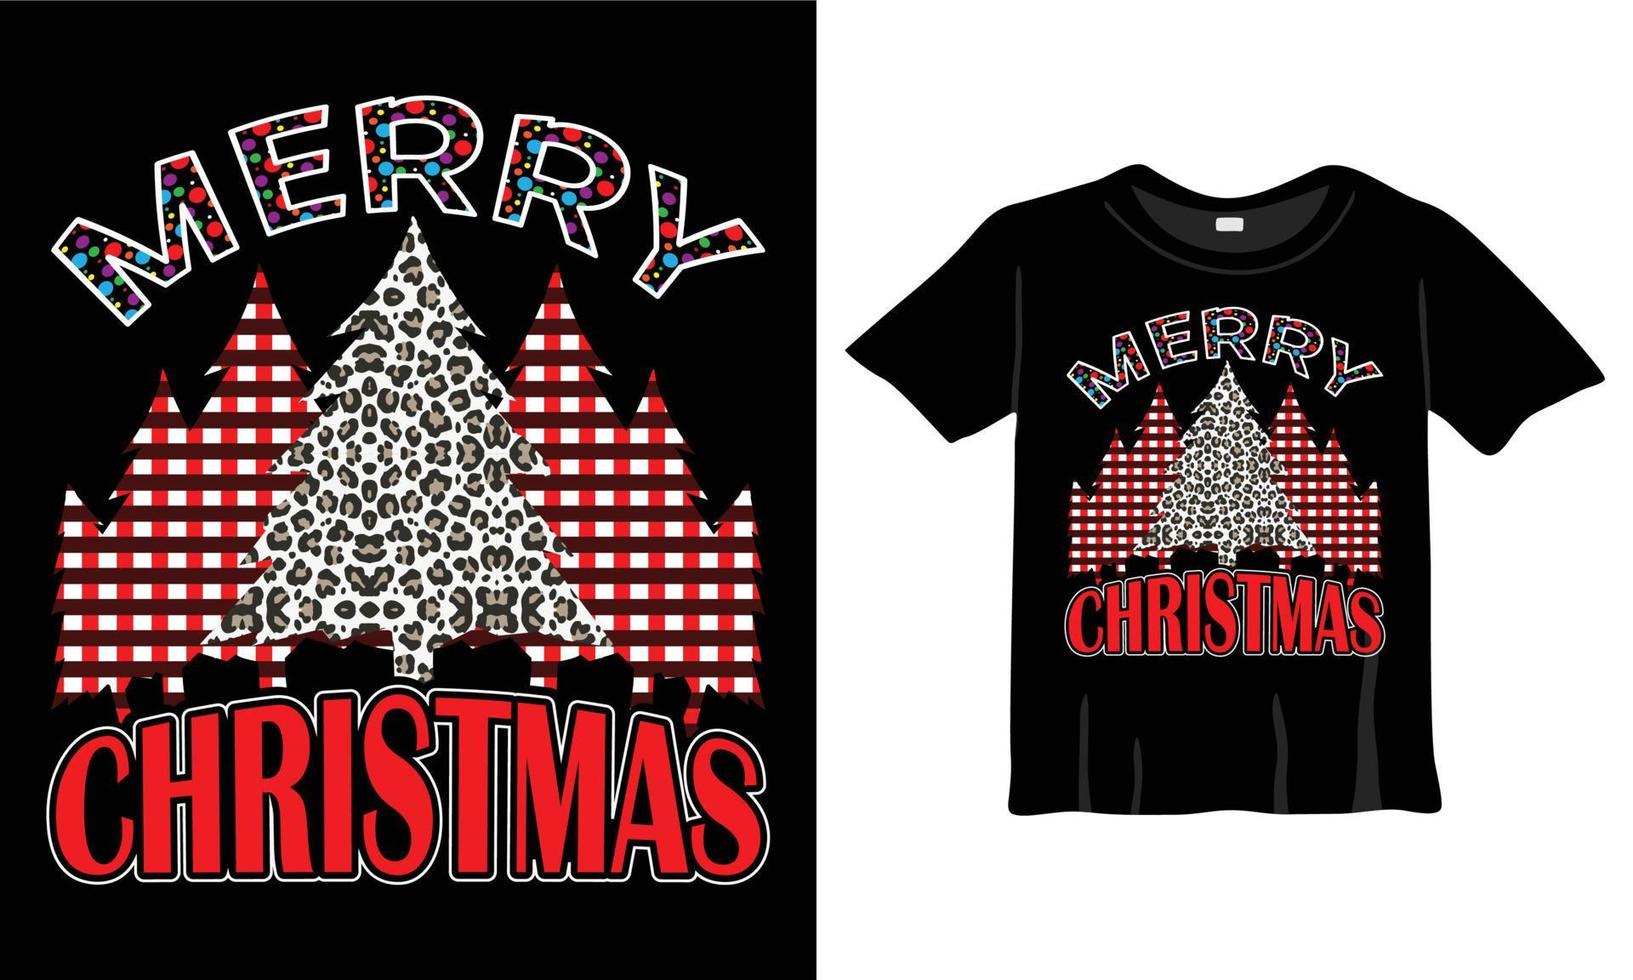 Merry Christmas T-Shirt Design Template with Christmas tree and Christmas pattern for Christmas Celebration. Good for Greeting cards, t-shirts, mugs, and gifts. For Men, Women, and Baby clothes vector